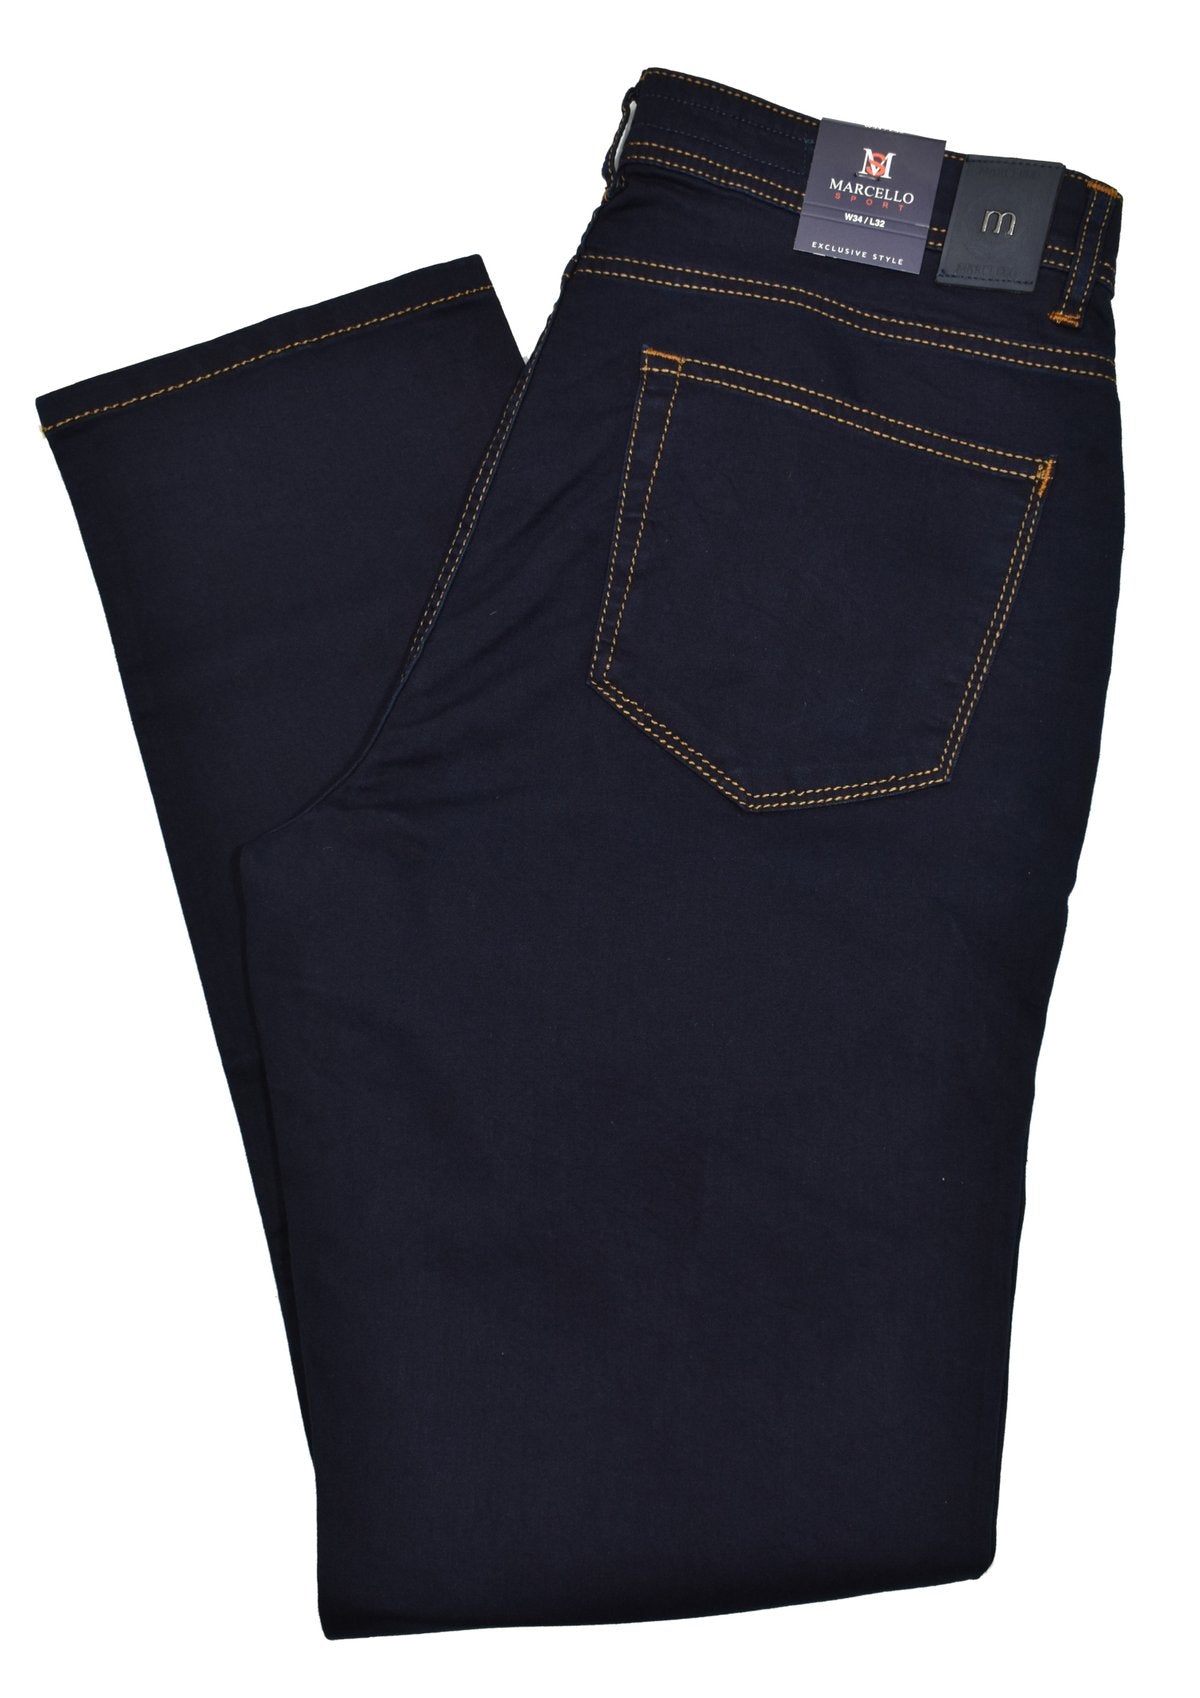 Stay comfortable and stylish with the LP10 Marcello Feather Weight Stretch Jeans. The lightweight design combined with stretch fabric makes them ideal for natural movements. The medium rise and classic fit are updated with a tapered leg, perfect for contemporary looks. Choose from Black, Denim and Navy, in sizes 30-35 (32 length) or 36-44 (33 length).